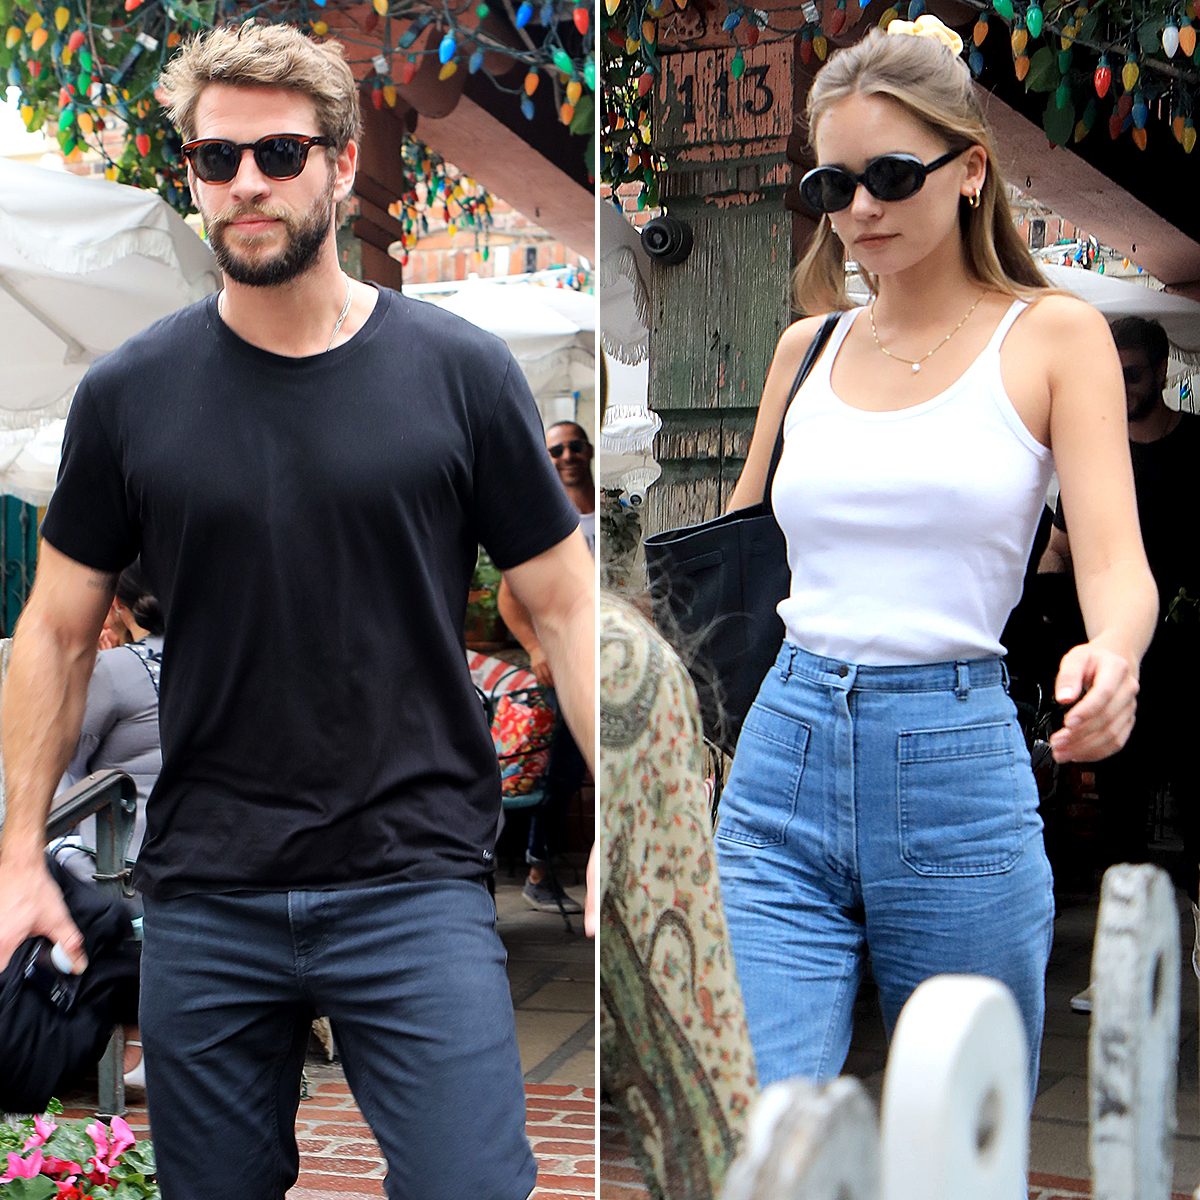 https://www.usmagazine.com/wp-content/uploads/2020/02/Liam-Hemsworth-Lunches-With-Girlfriend-Gabriella-Brooks-in-Los-Angeles.jpg?quality=40&strip=all